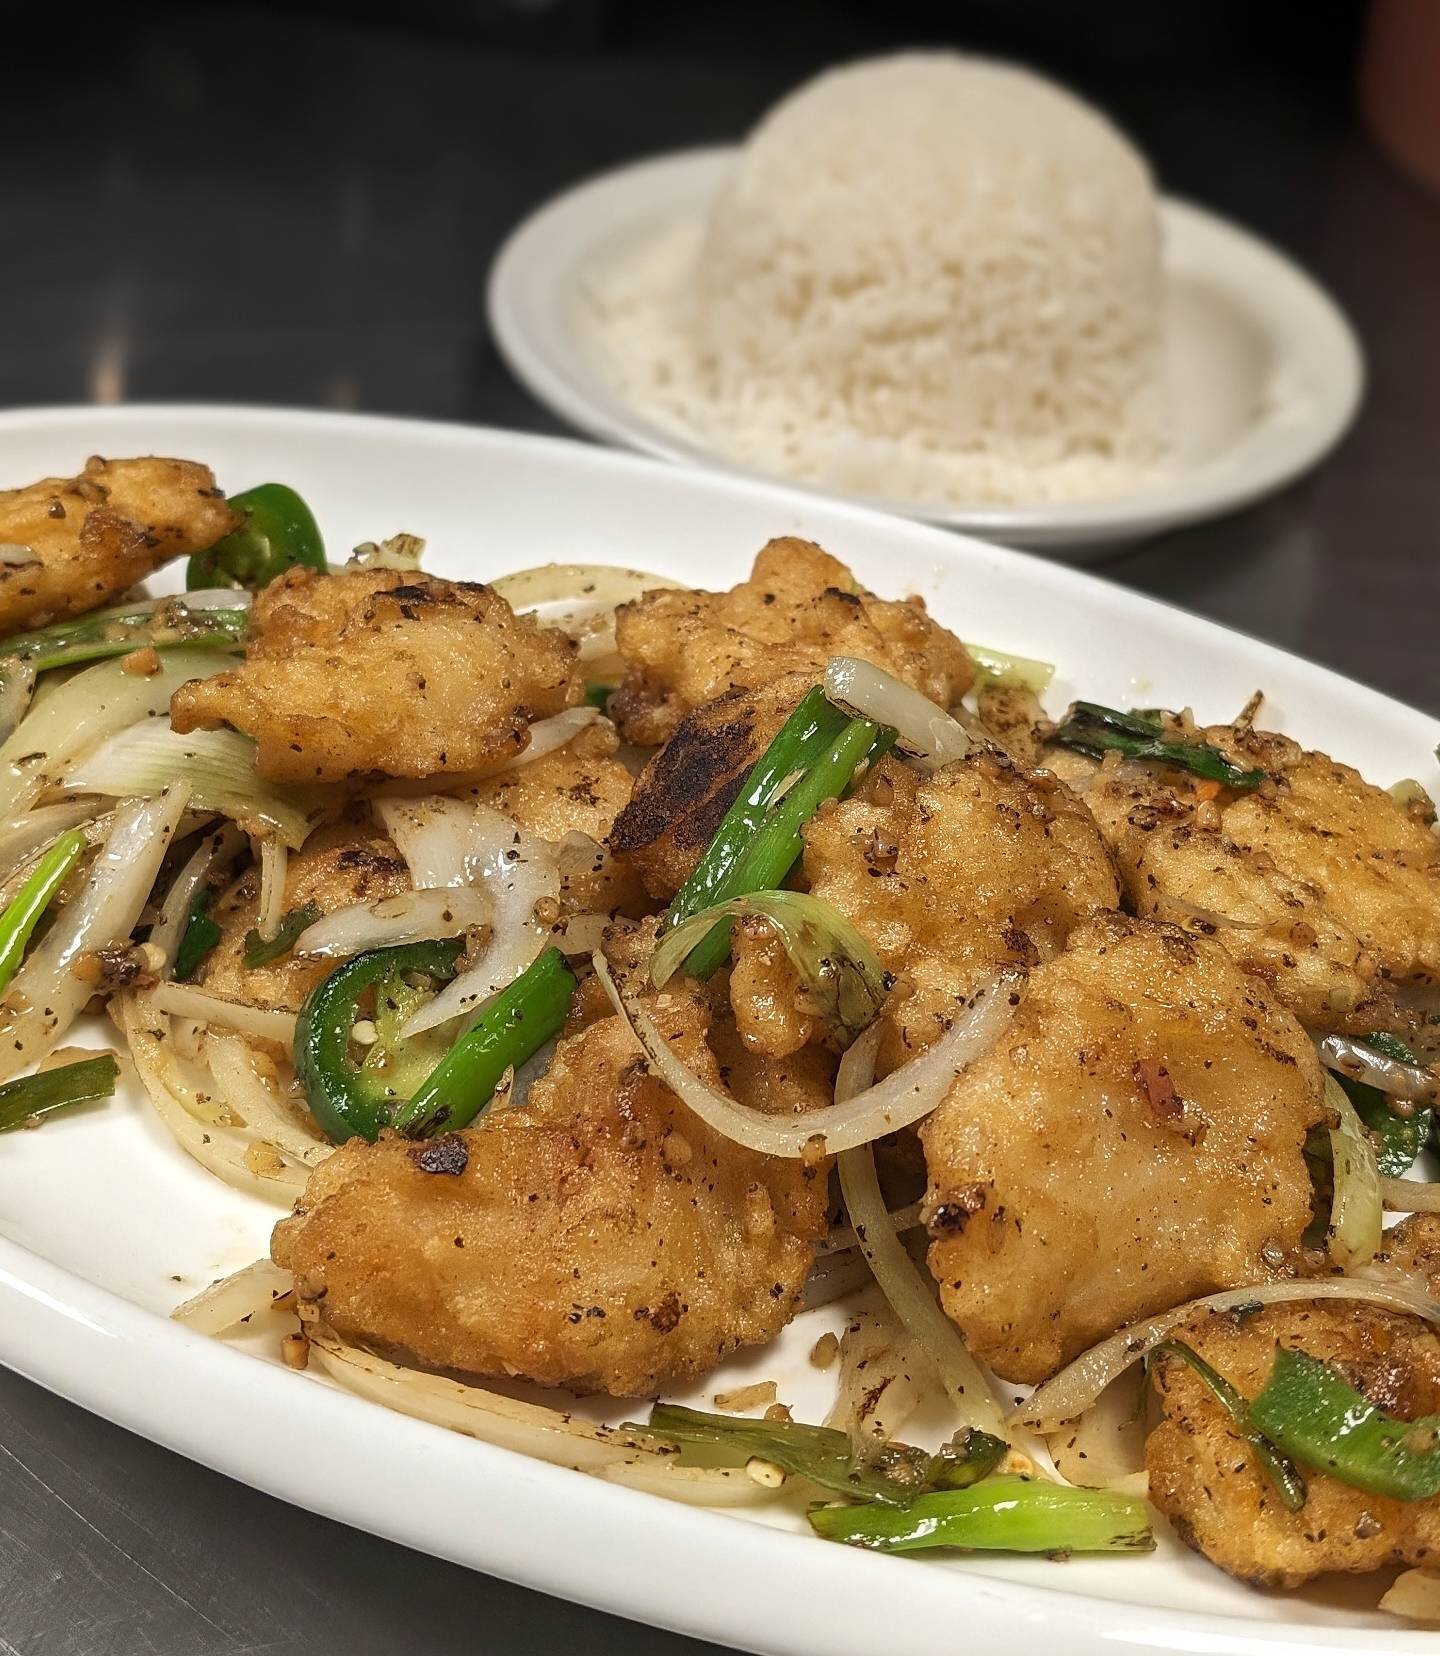 It's Fish Friday! 
Come by and try one of the delicious fish or shrimp dishes we offer. 🍤🍤🍤
Pictured here is our crispy Salt n Pepper Fish! 

A perfectly tempura battered dish, thats tossed with a simple seasoning of salt and pep.